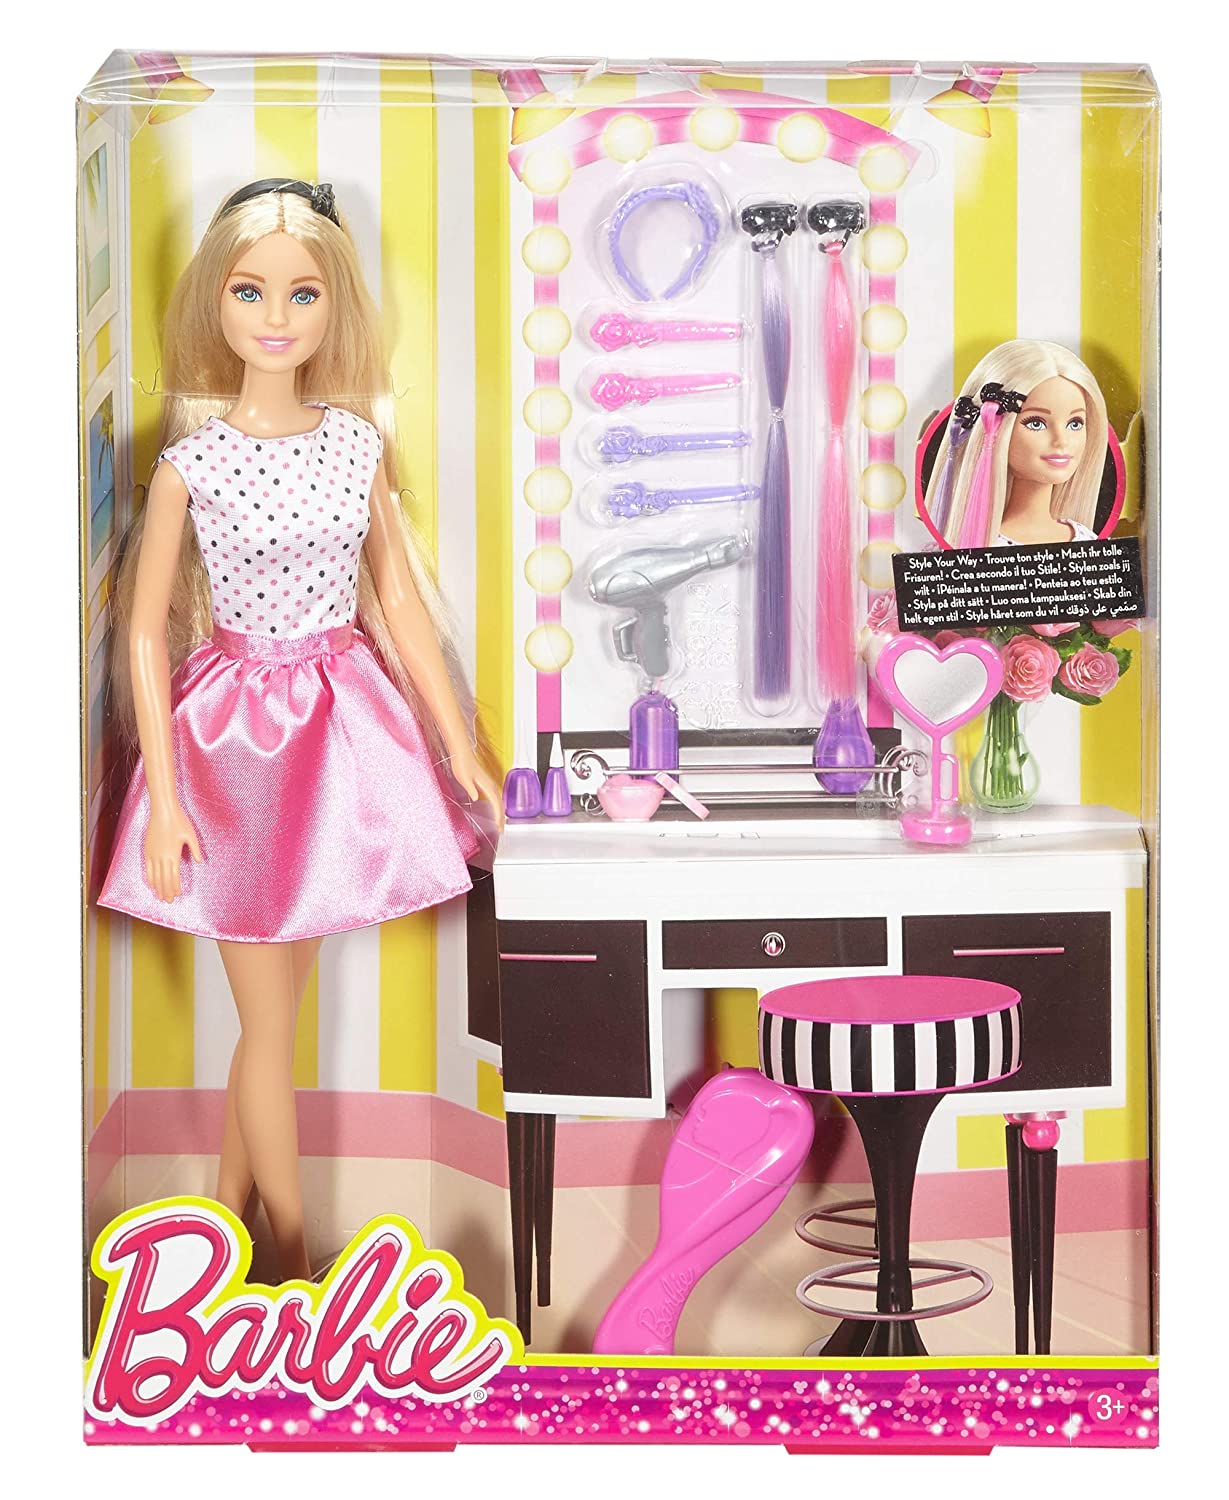 Barbie DJP92 Doll and Playset with hair styling accessories